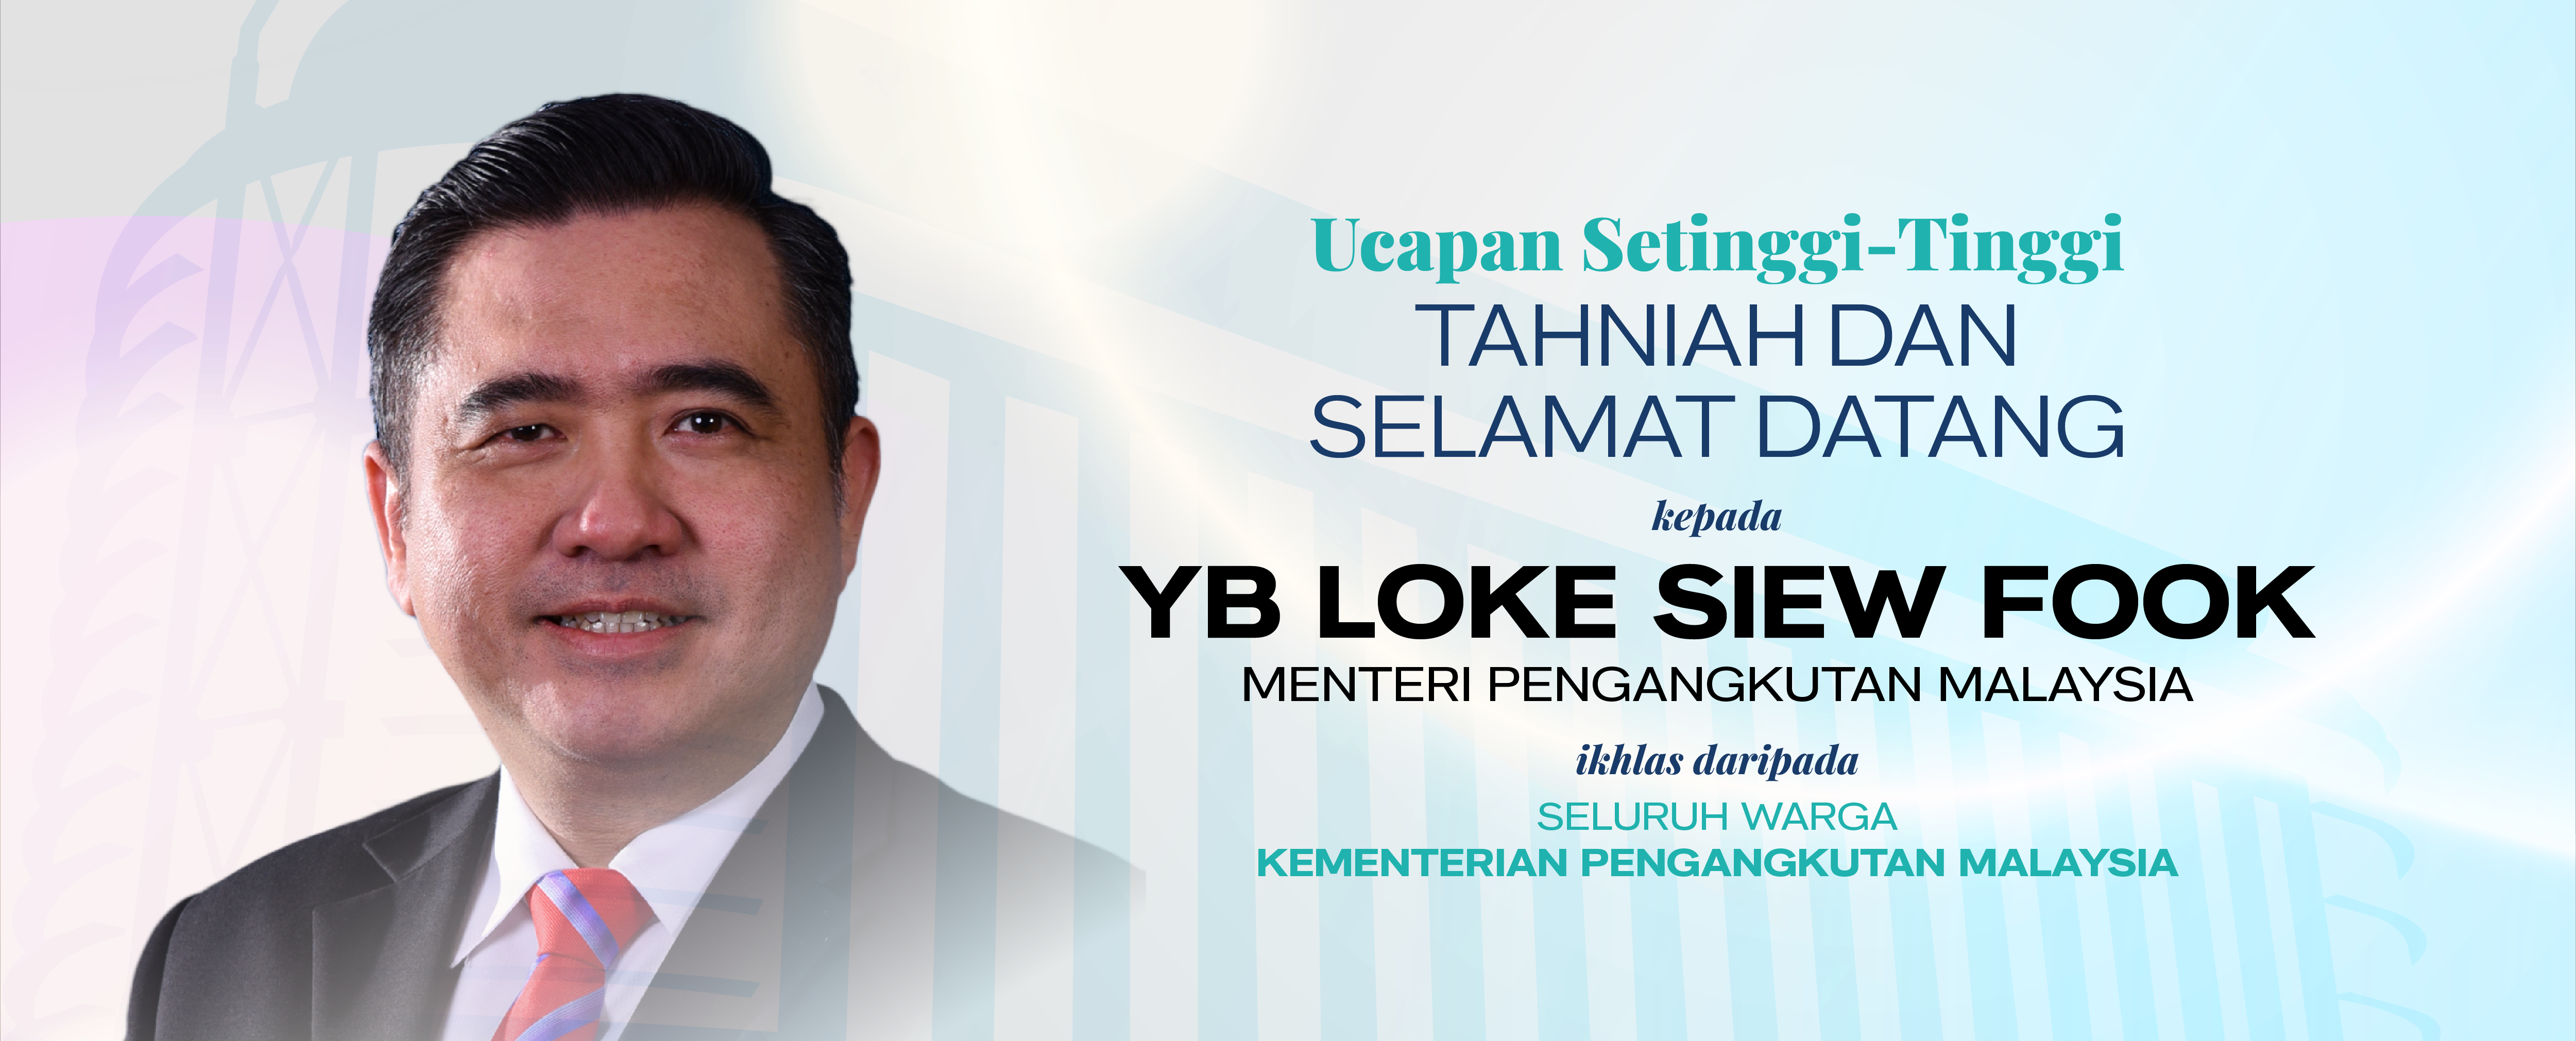 Welcome To Honorable Minister Loke Siew Fook